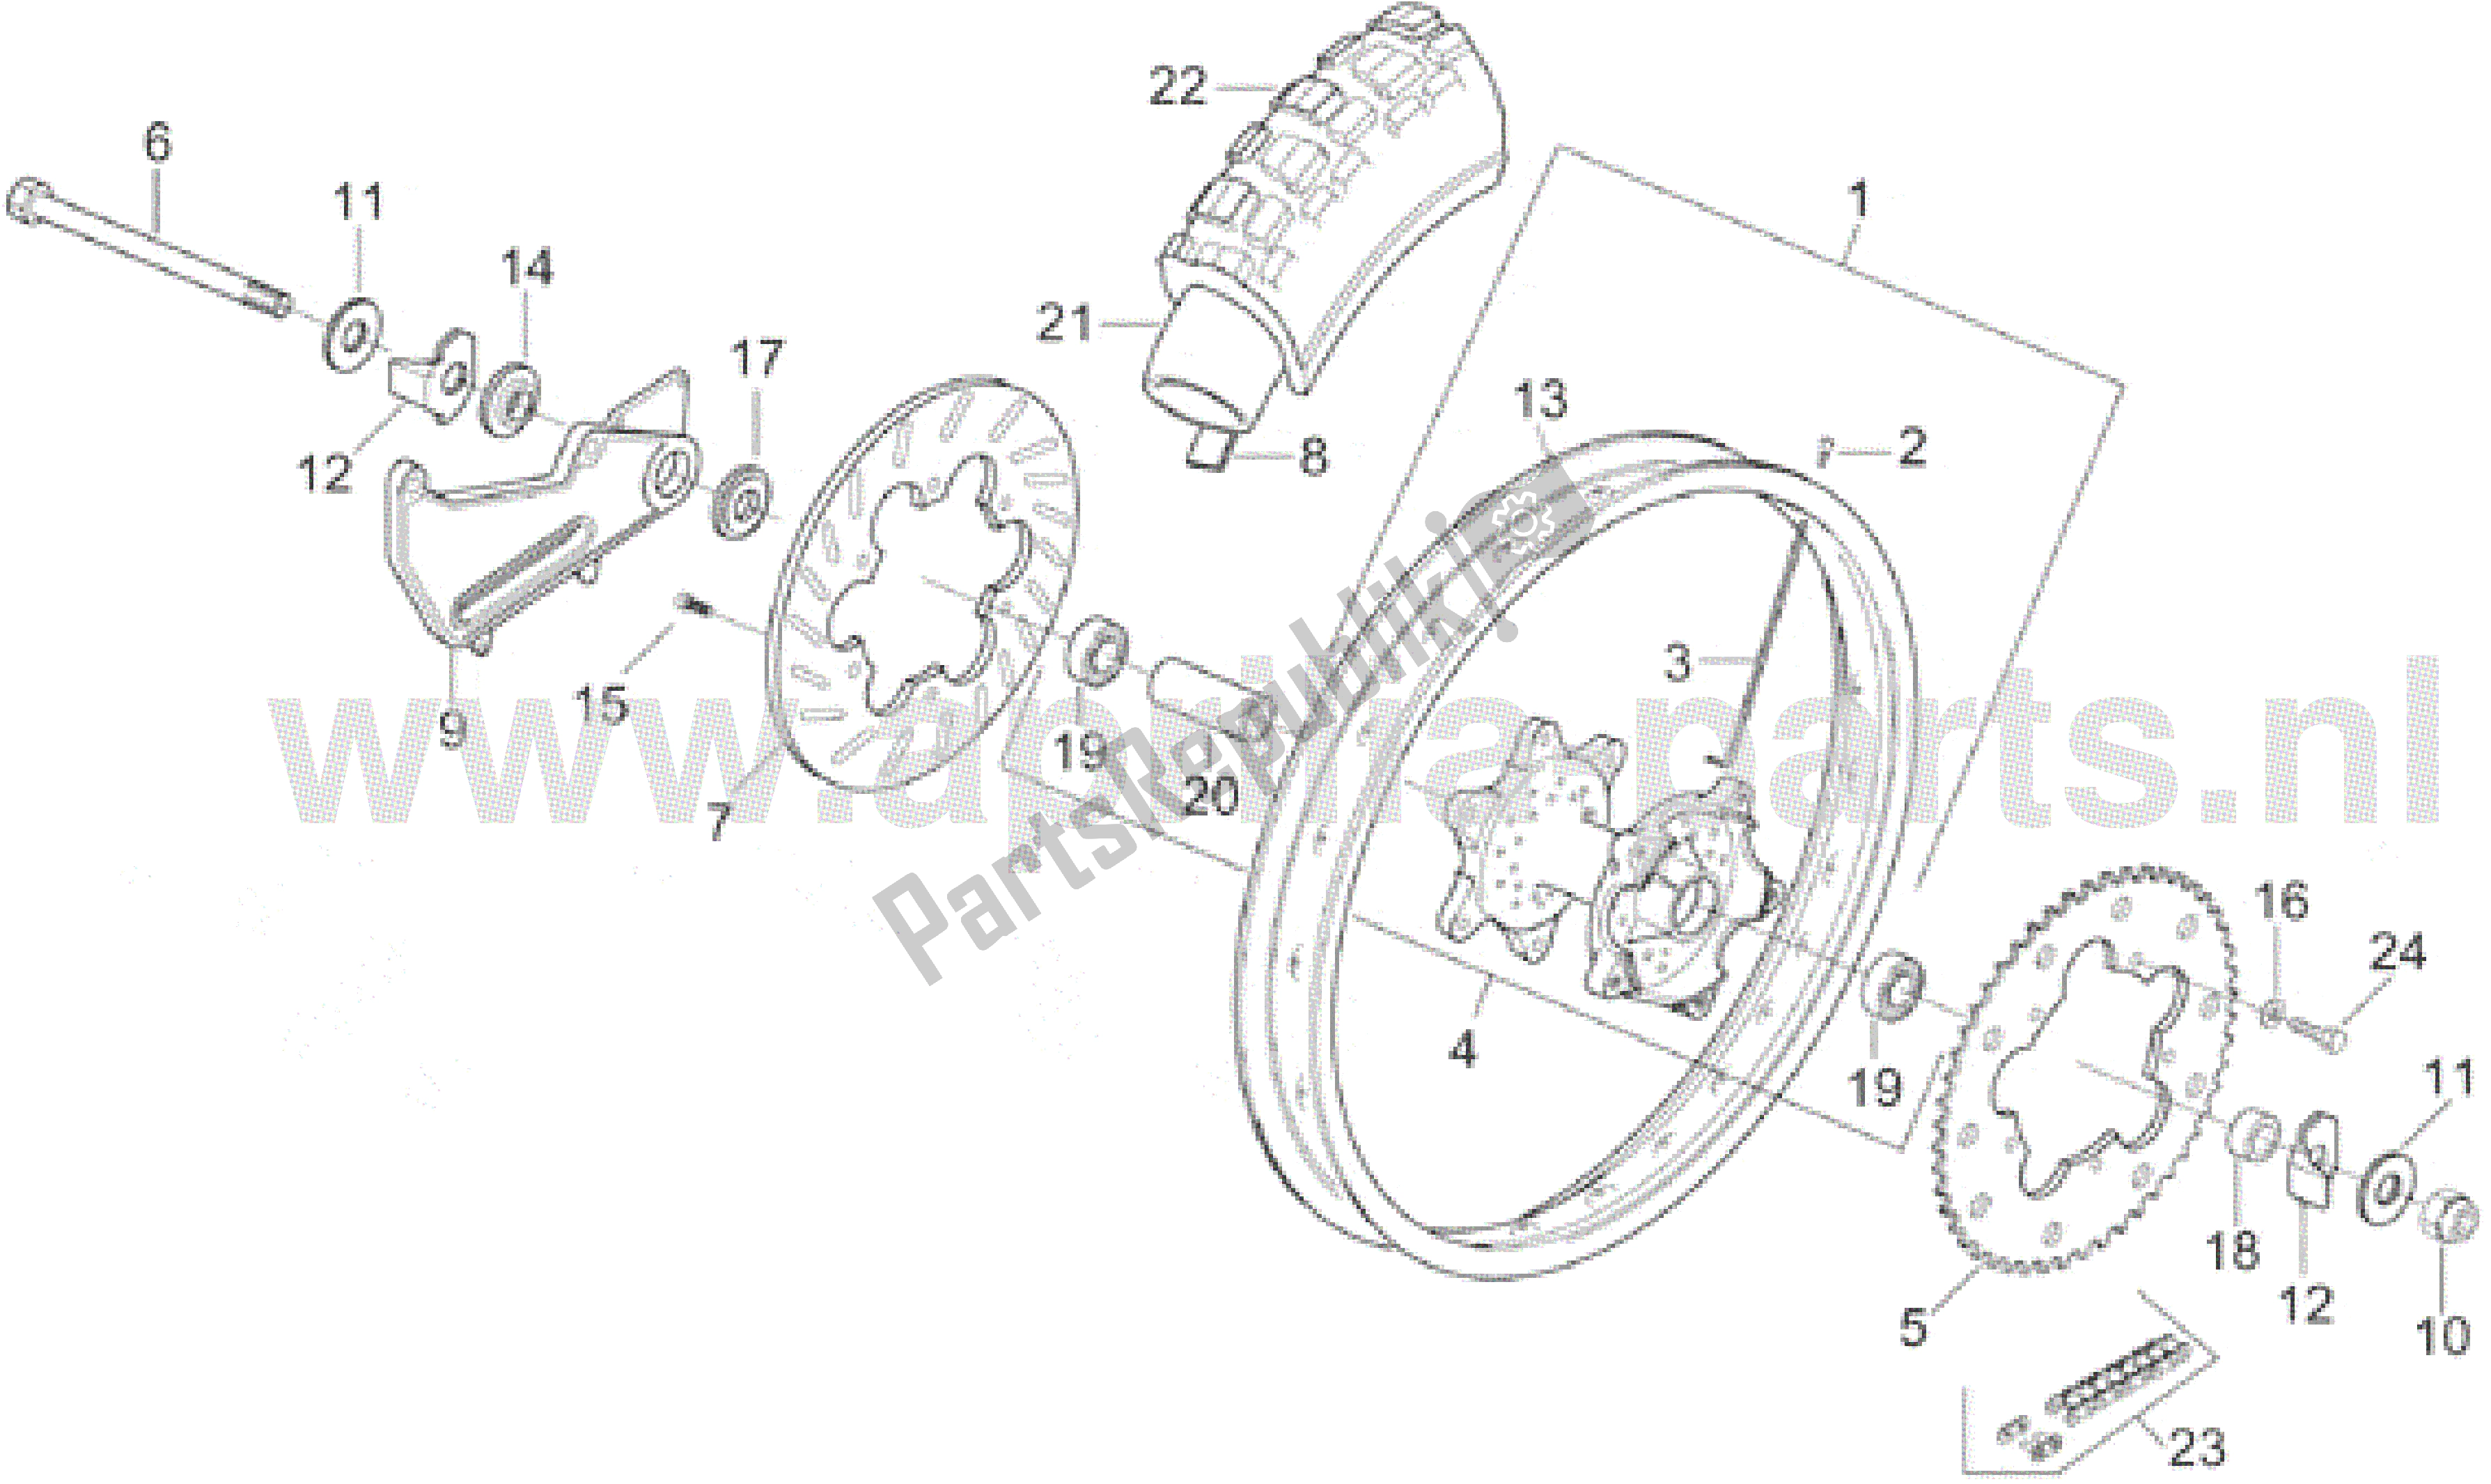 All parts for the Rear Wheel of the Aprilia RX 50 1995 - 2000